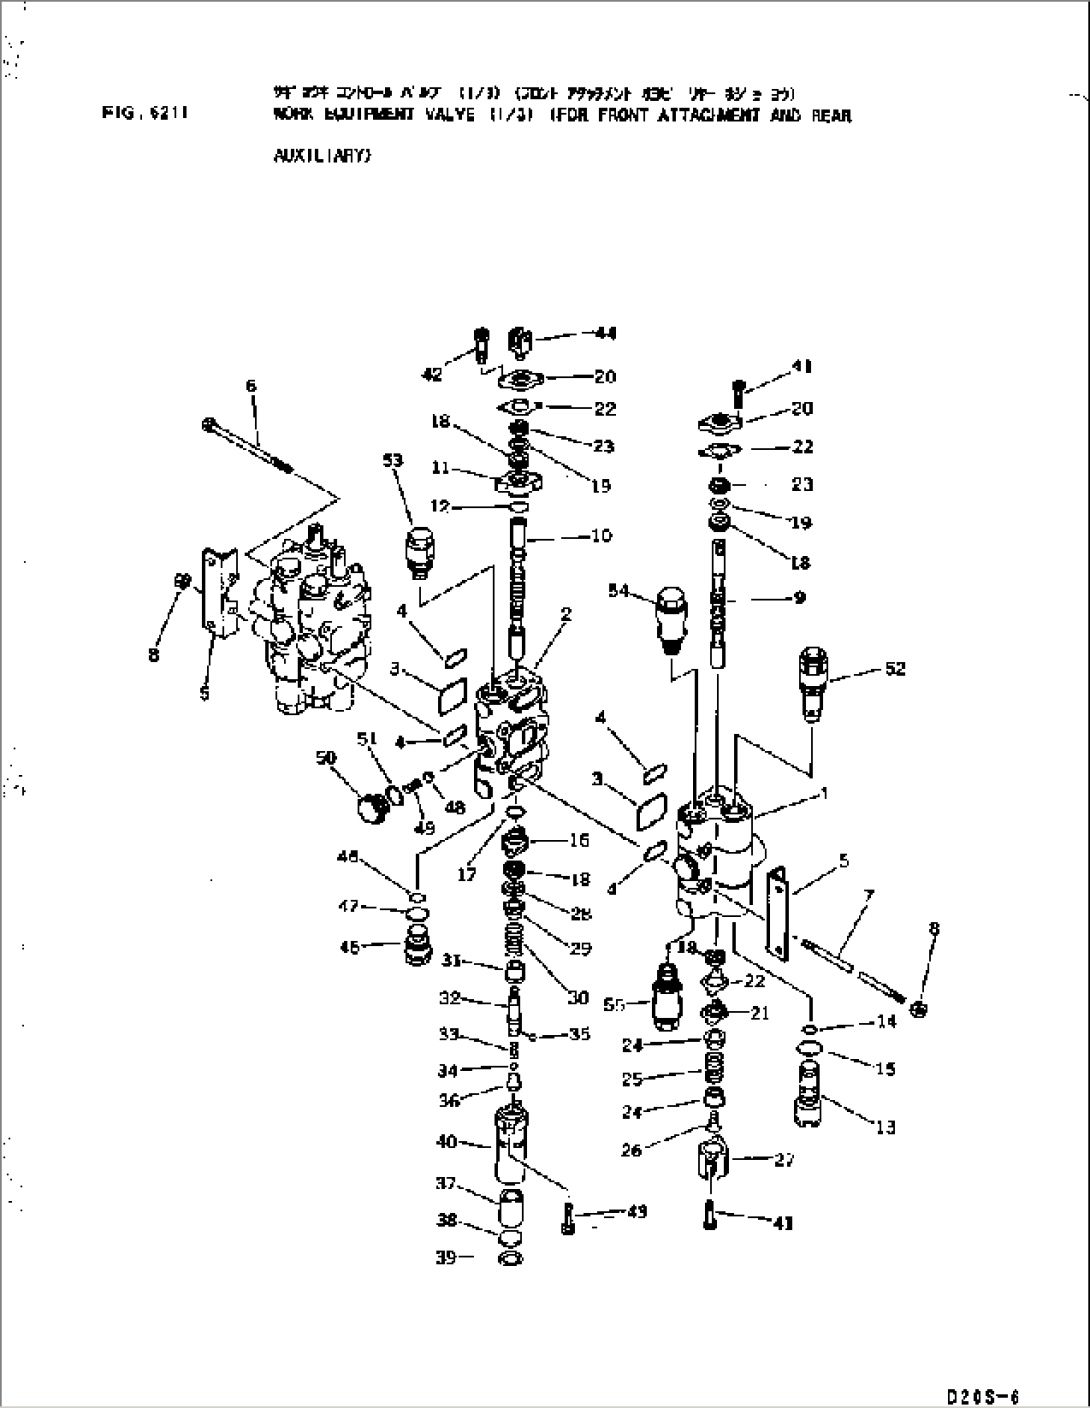 WORK EQUIPMENT VALVE (1/3) (FOR FRONT ATTACHMENT AND REAR AUXILIARY)